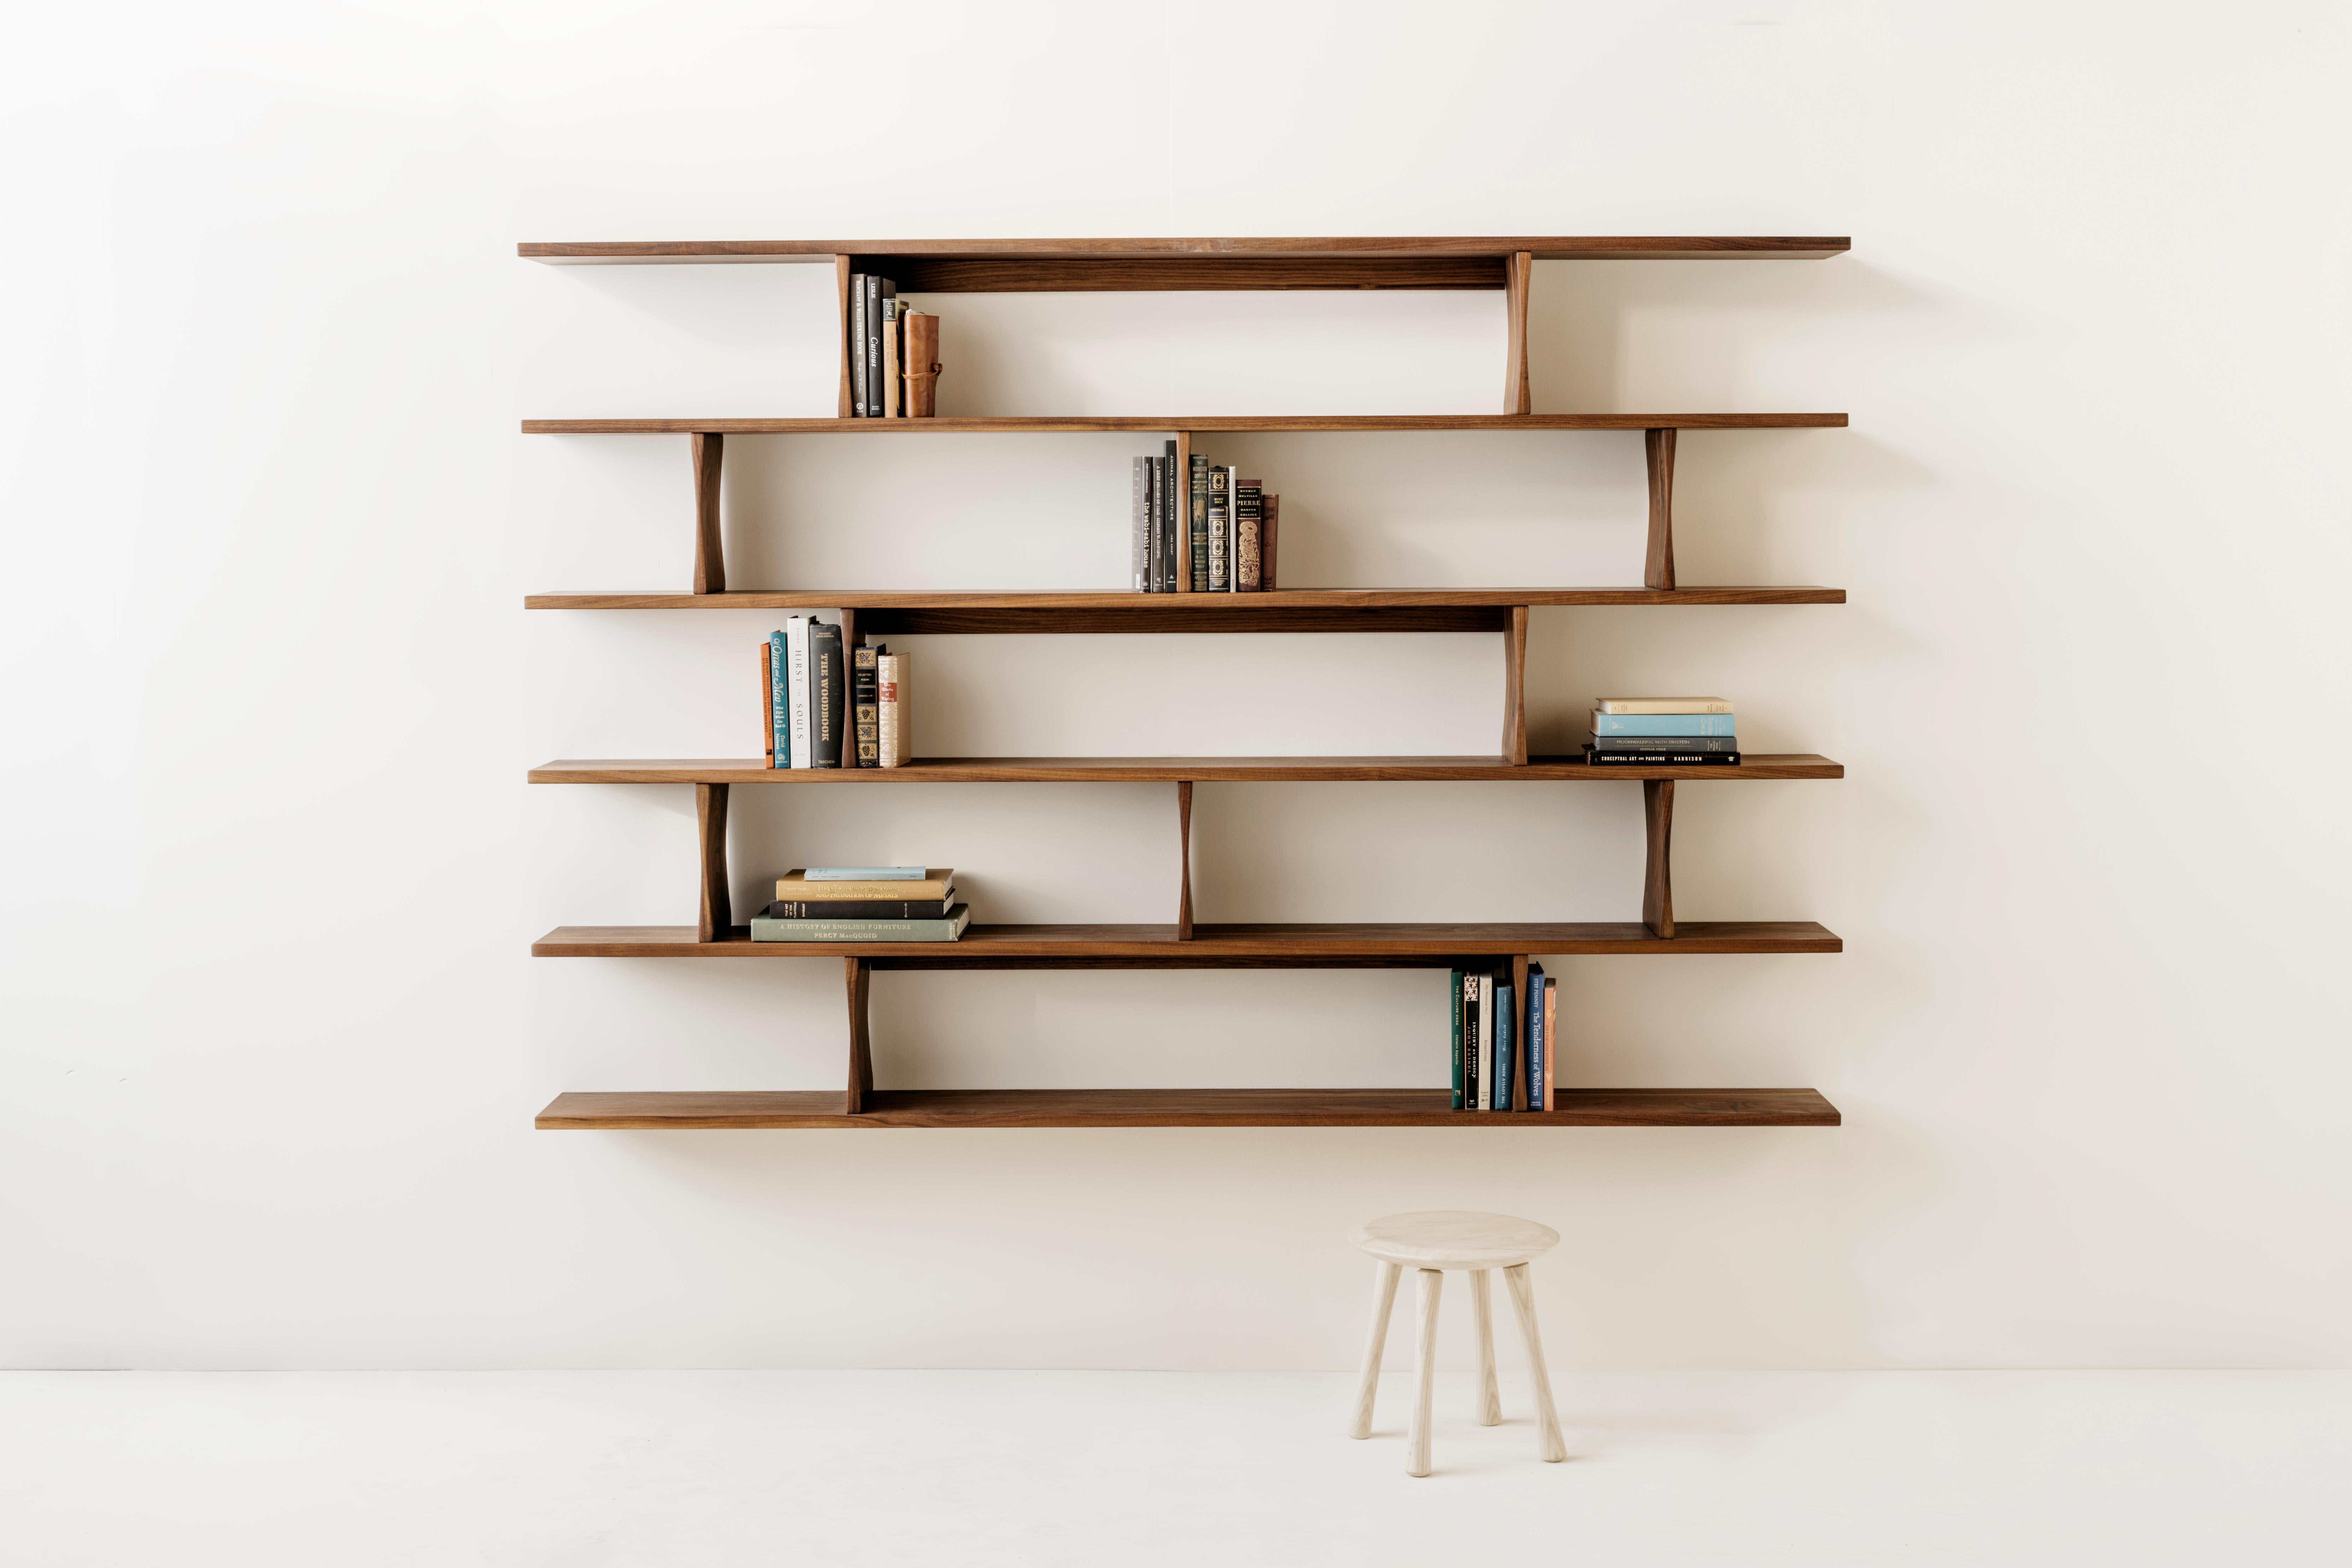 Richard Watson wall-mounted bookshelves are designed to appear as though they are floating on the wall. They are mounted with a minimal cleat system that conceals any mounting hardware, allowing the form of the shelves to be uninterrupted. The